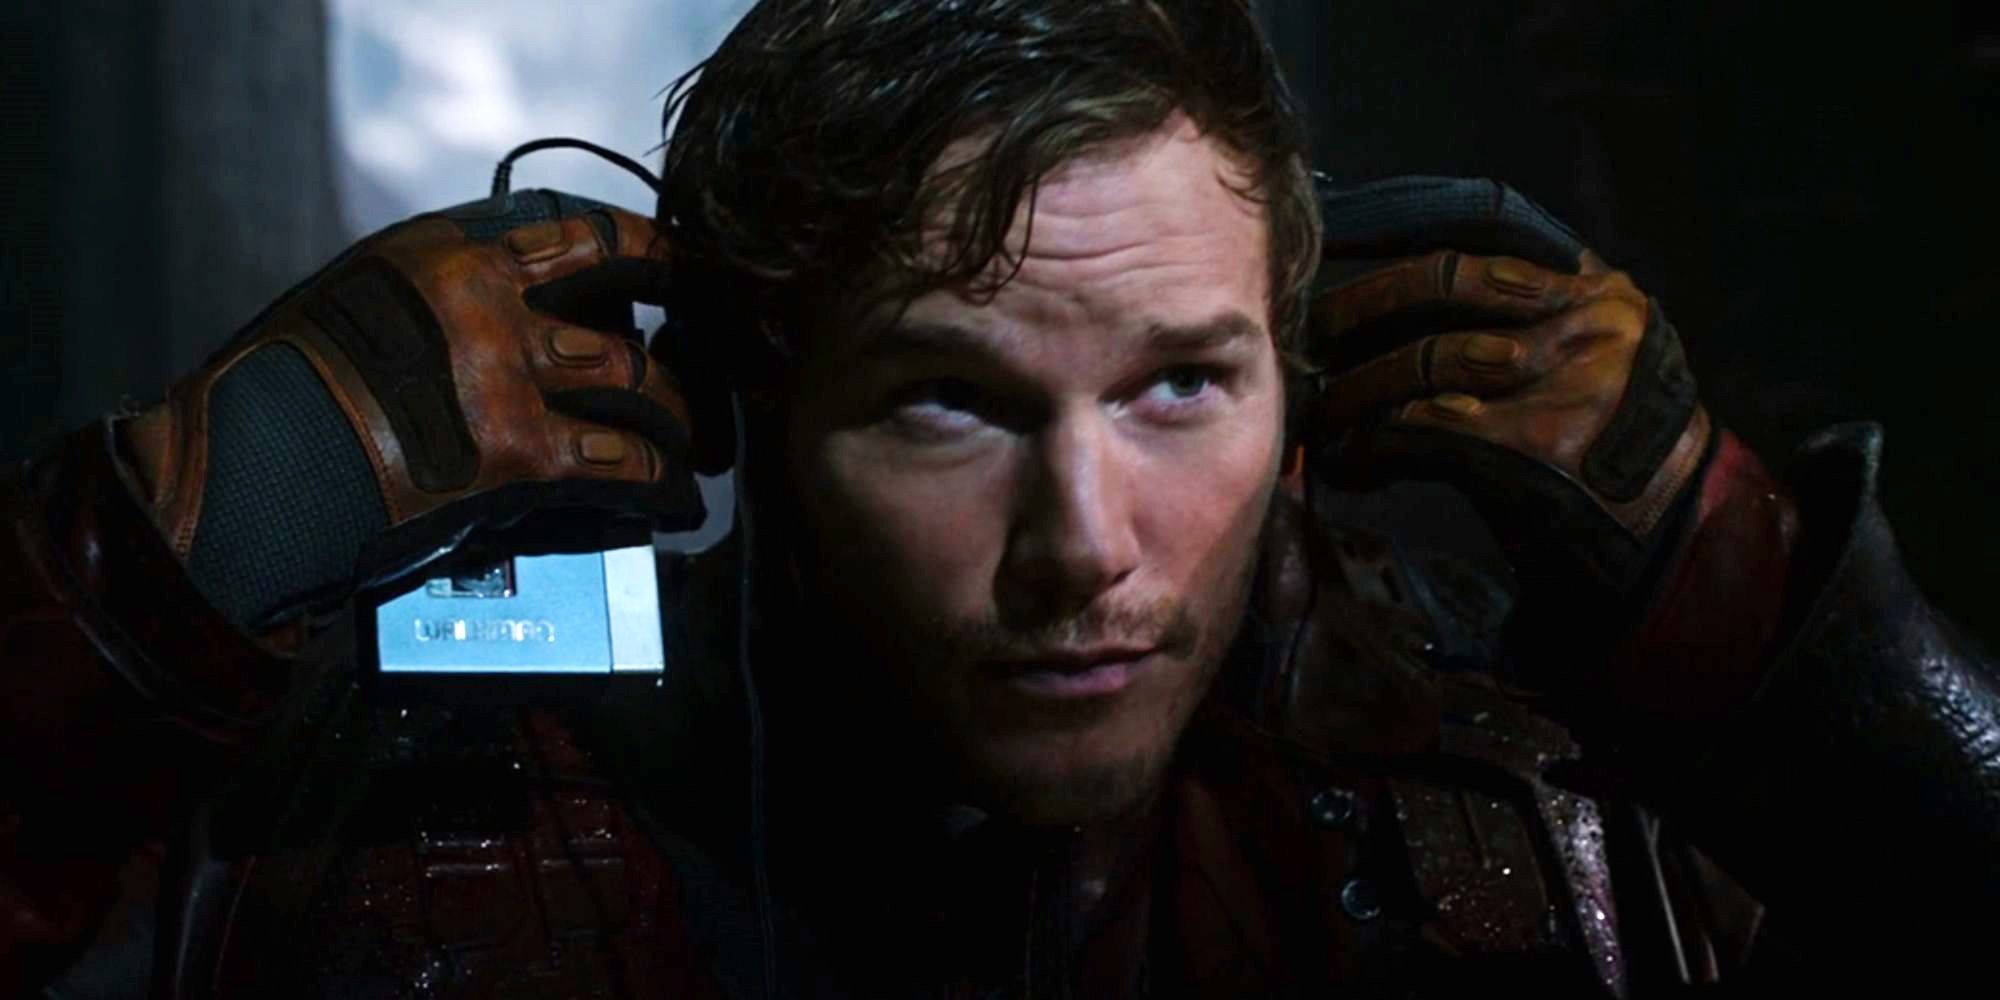 Guardians of the Galaxy Star Lord Chris Pratt Awesome Mix headphones